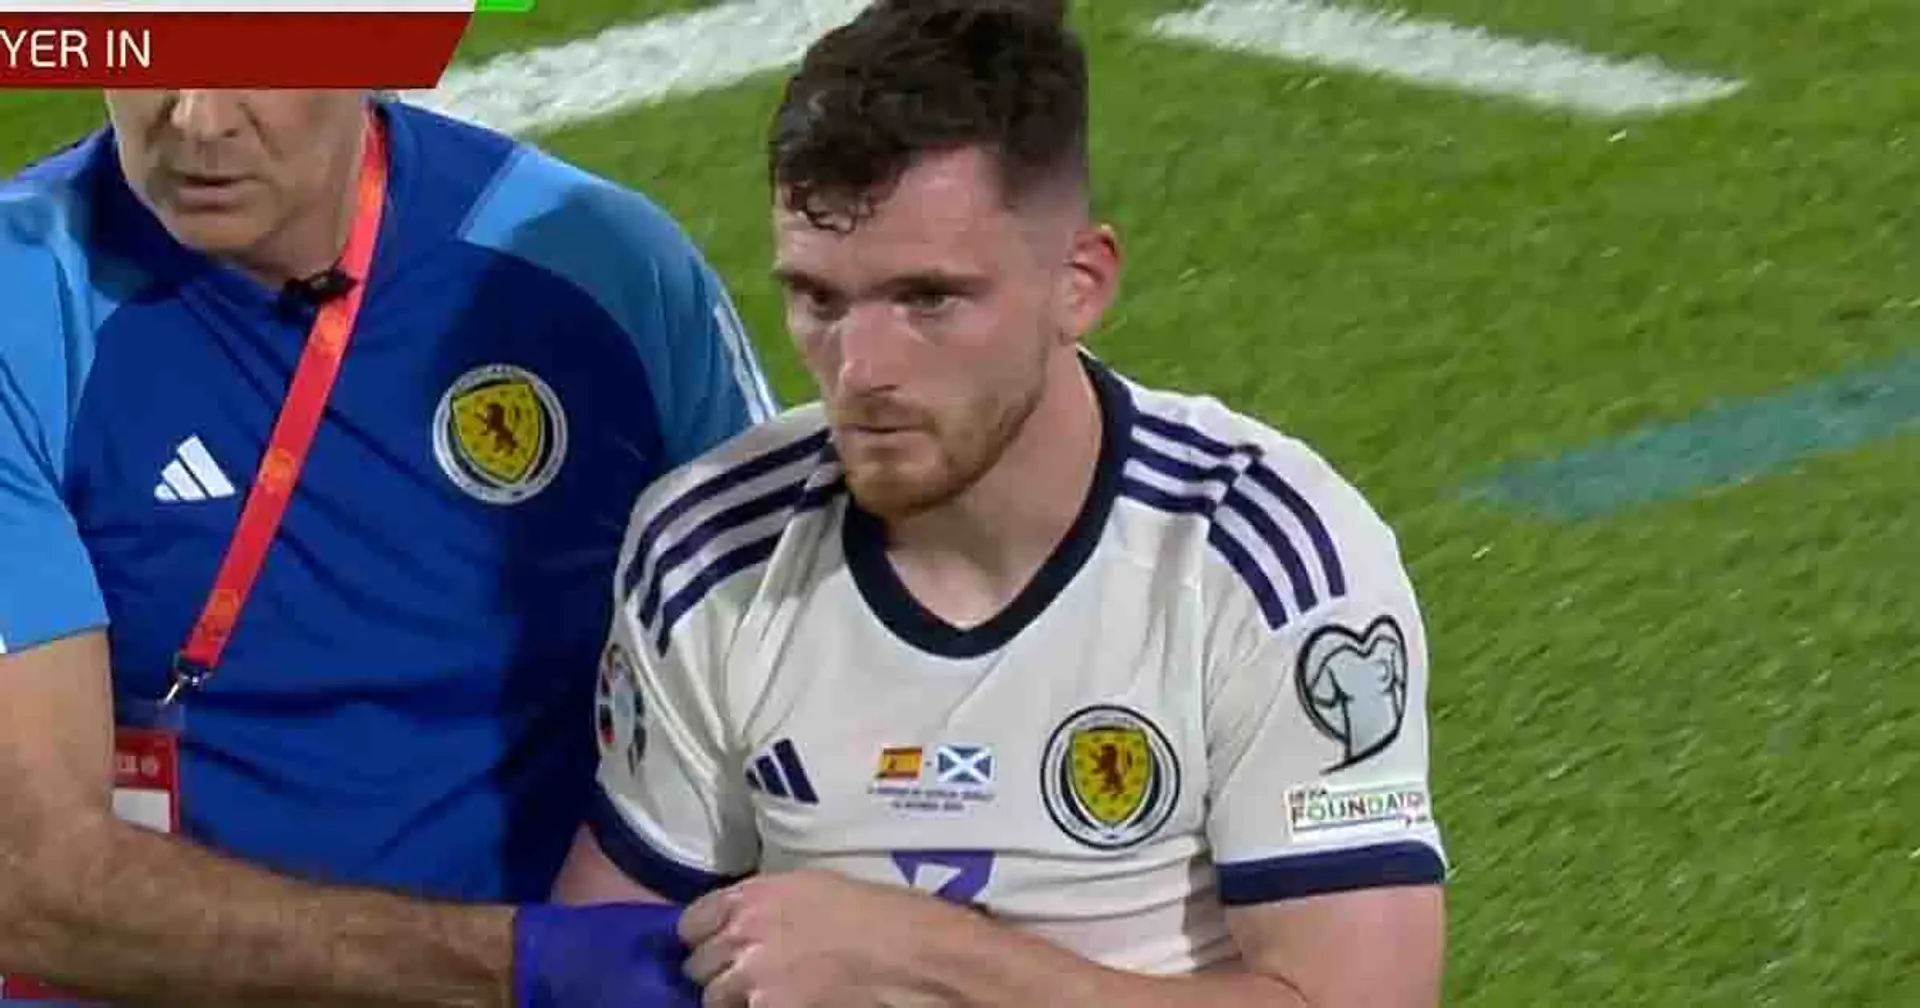 Spotted: Andy Robertson substituted vs Spain after suffering possible dislocated shoulder